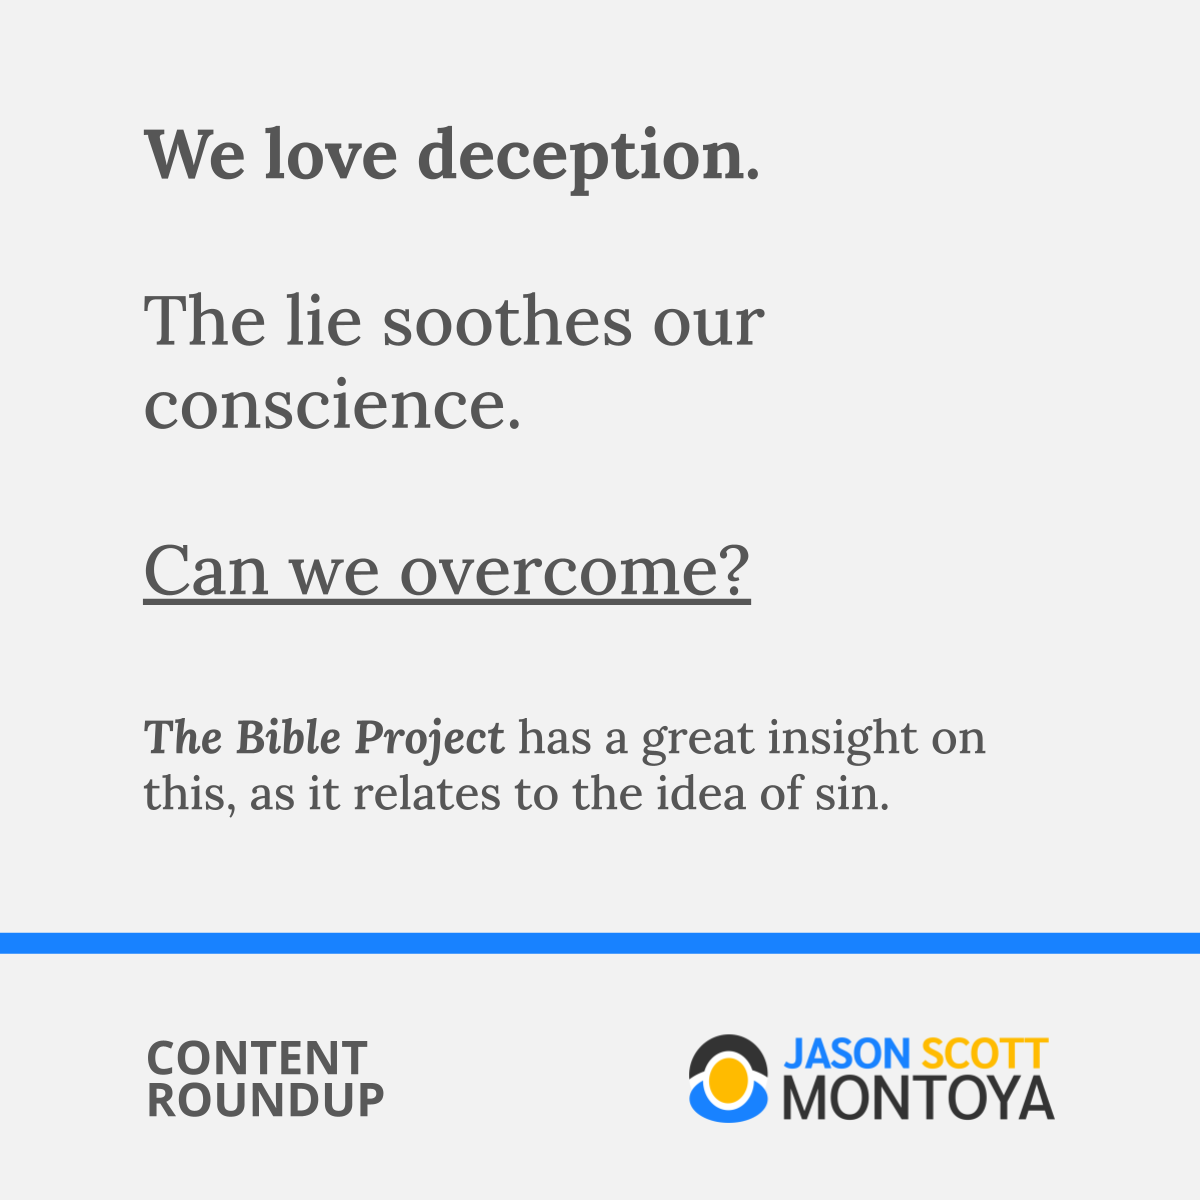 We love deception.  The lie soothes our conscience.   Can we overcome?  The Bible Project has a great insight on this, as it relates to the idea of sin.